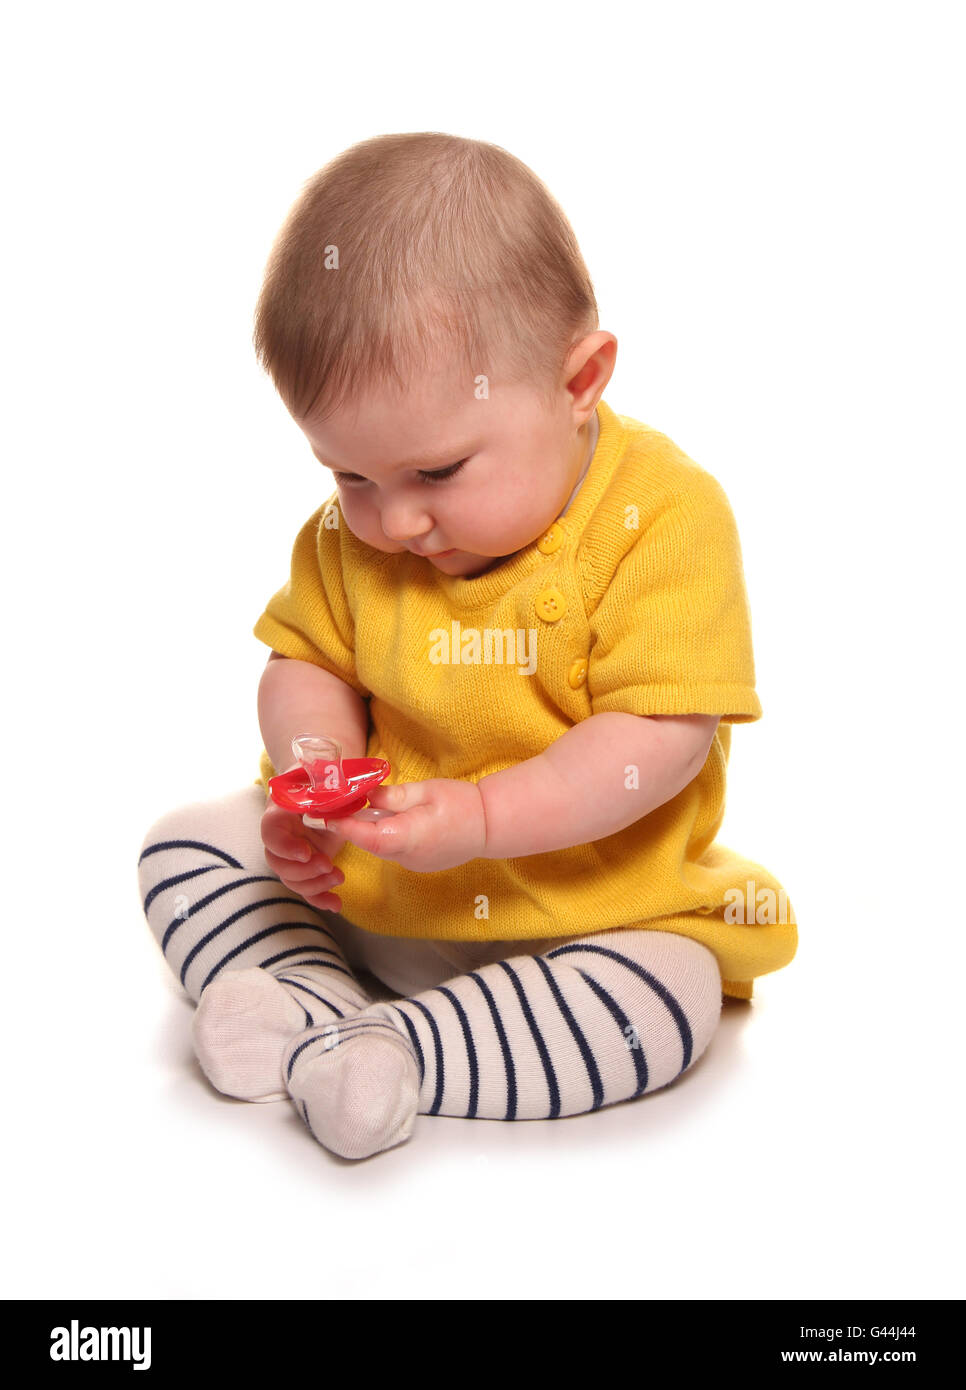 Baby girl holding a dummy cutout Stock Photo